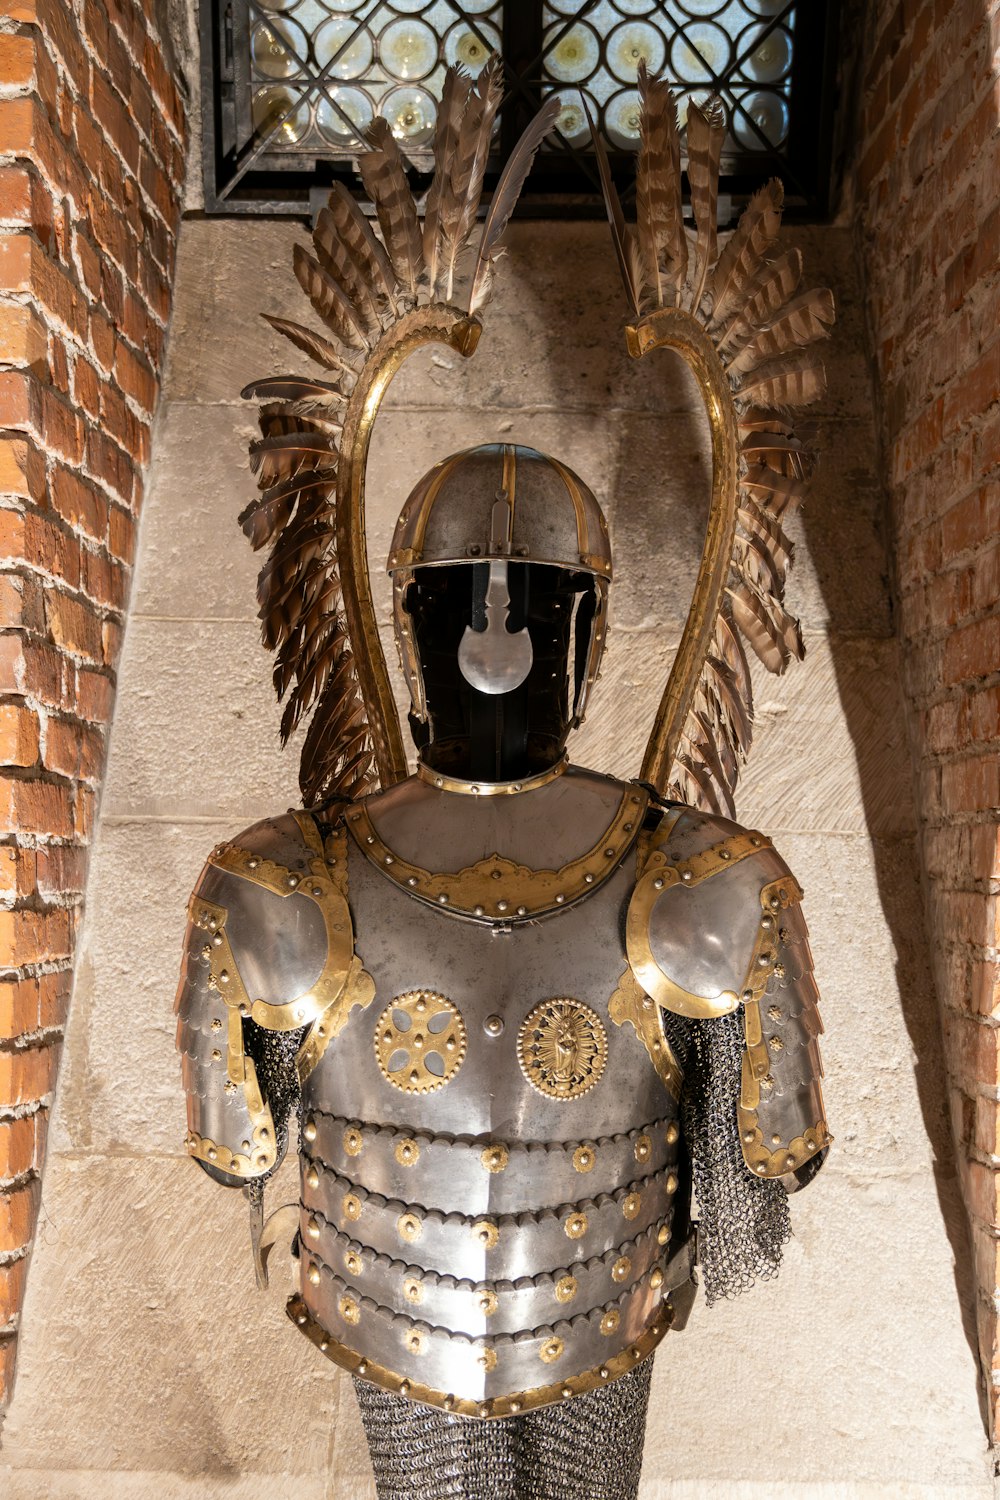 a statue of a knight with a helmet and armor